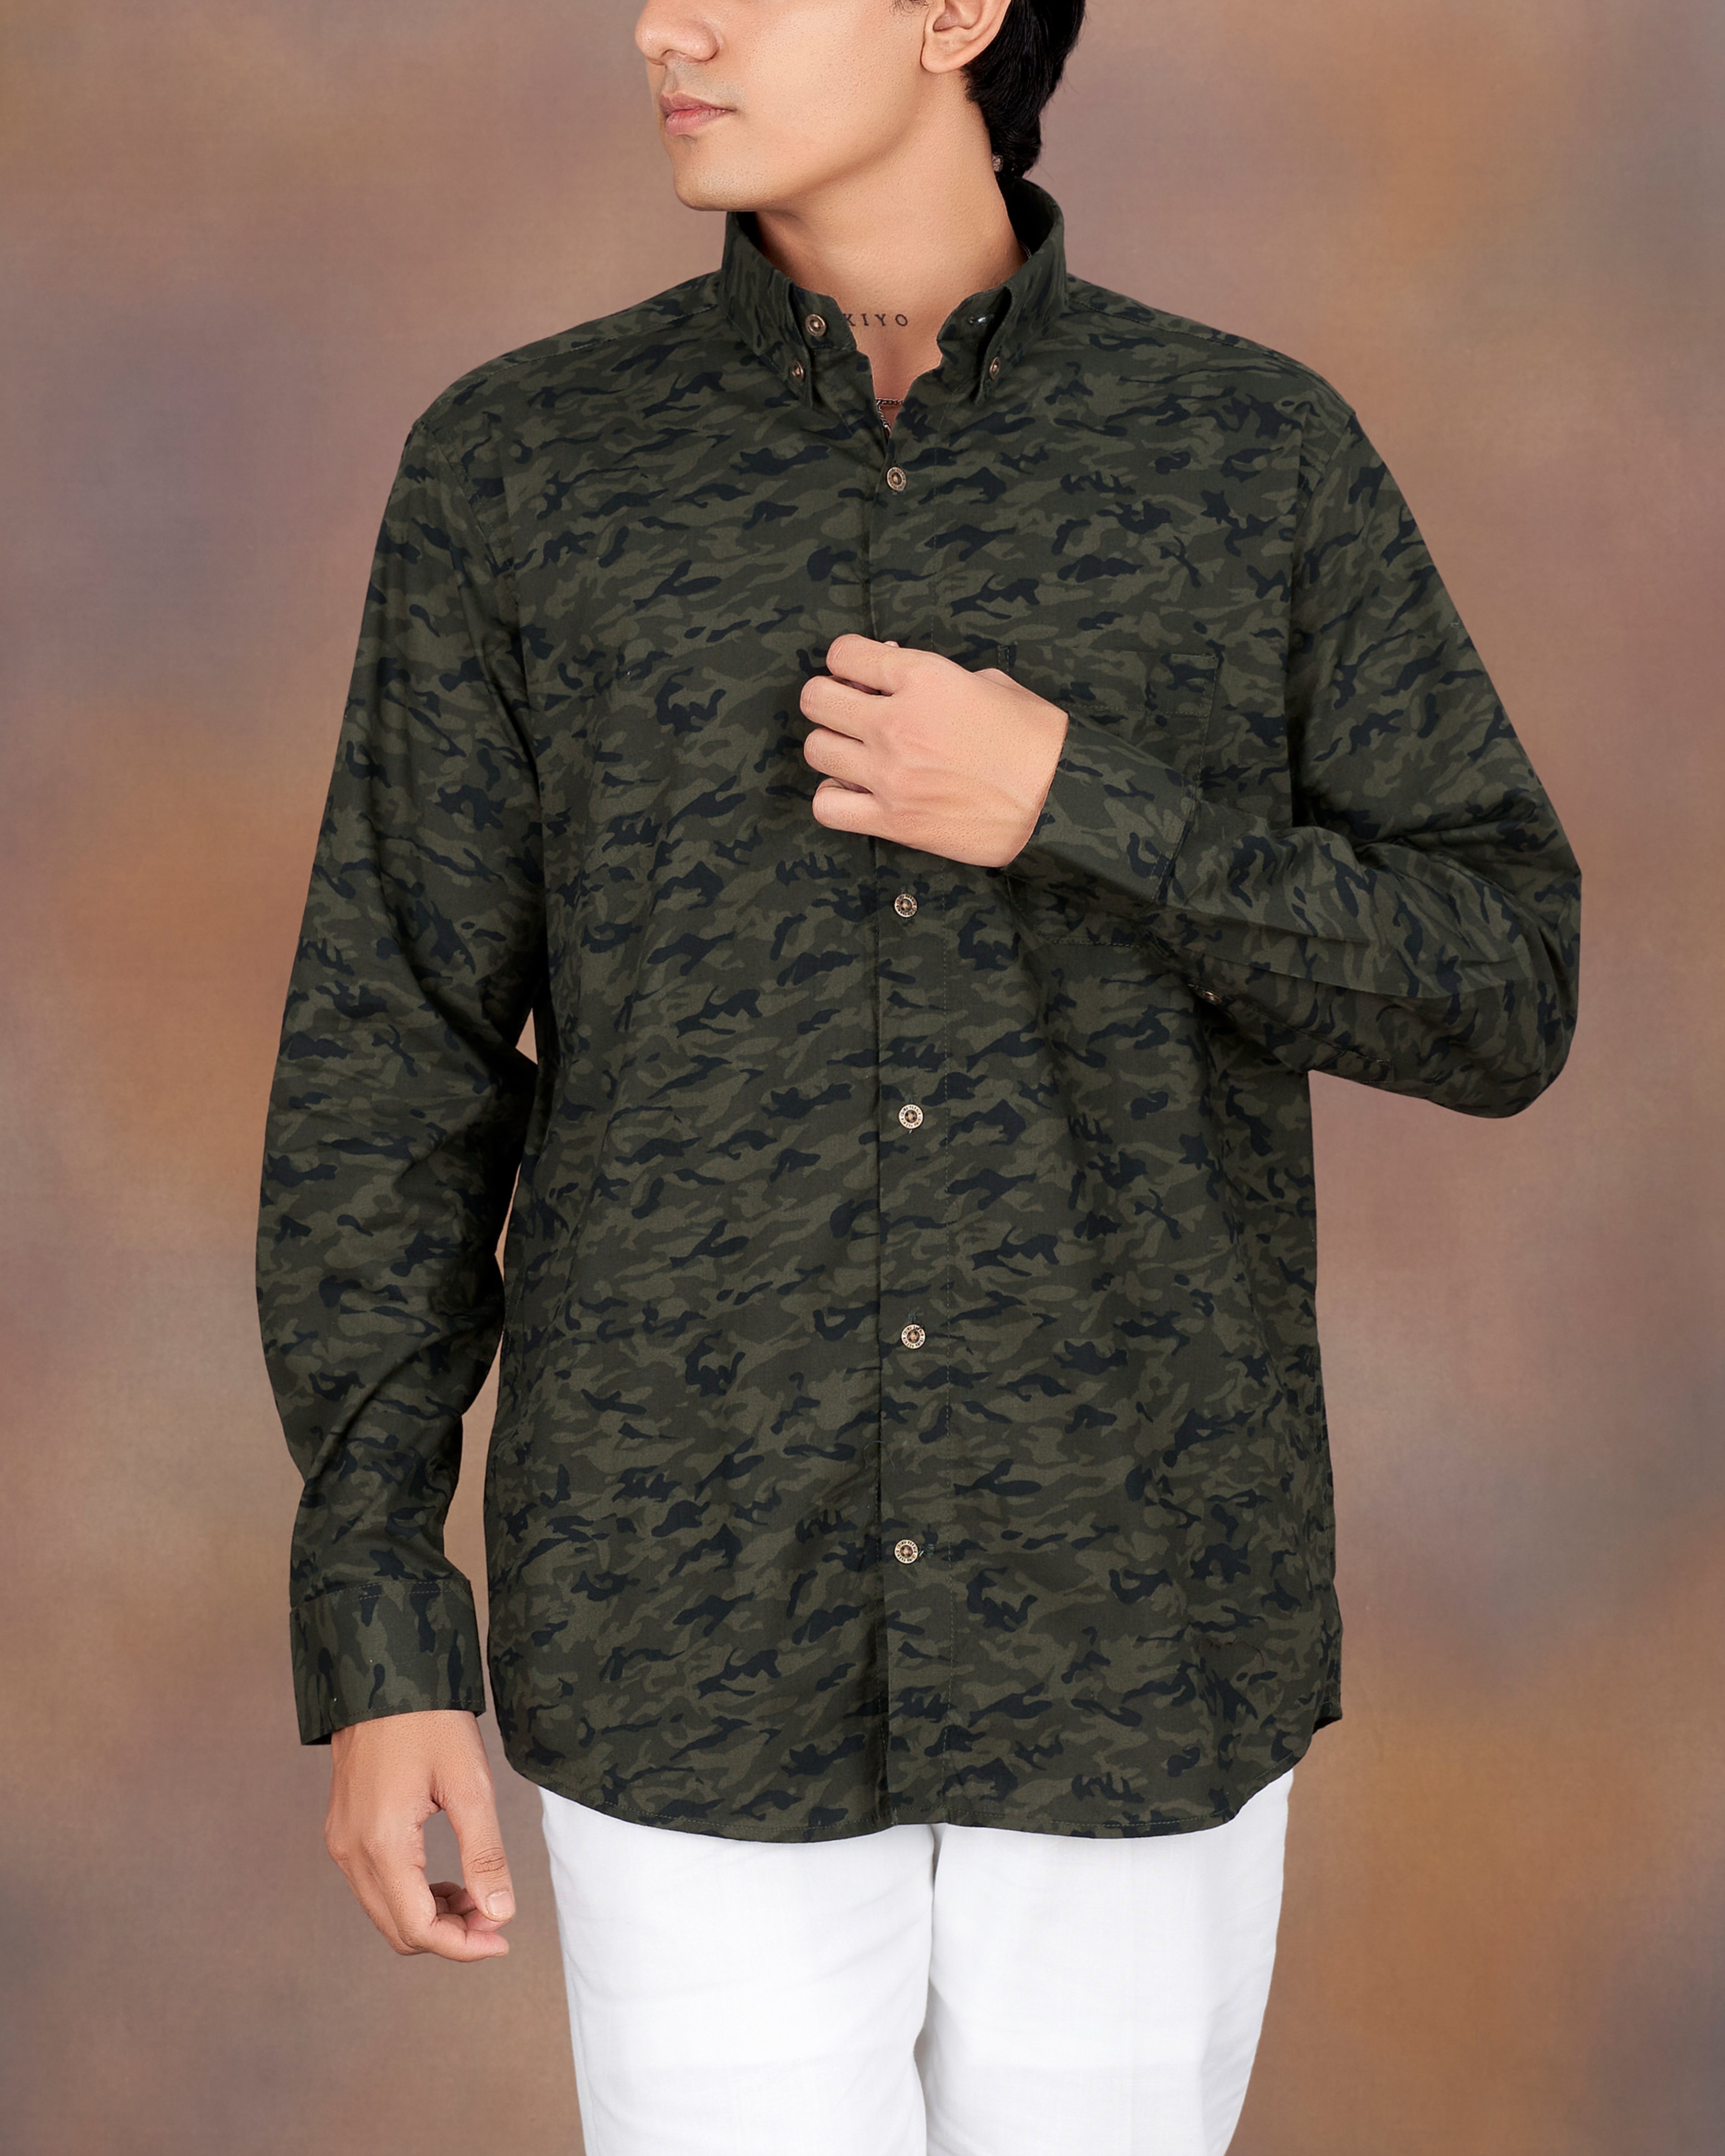 Eternity Green with Mirage Gray Camouflage Printed Premium Cotton Shirt